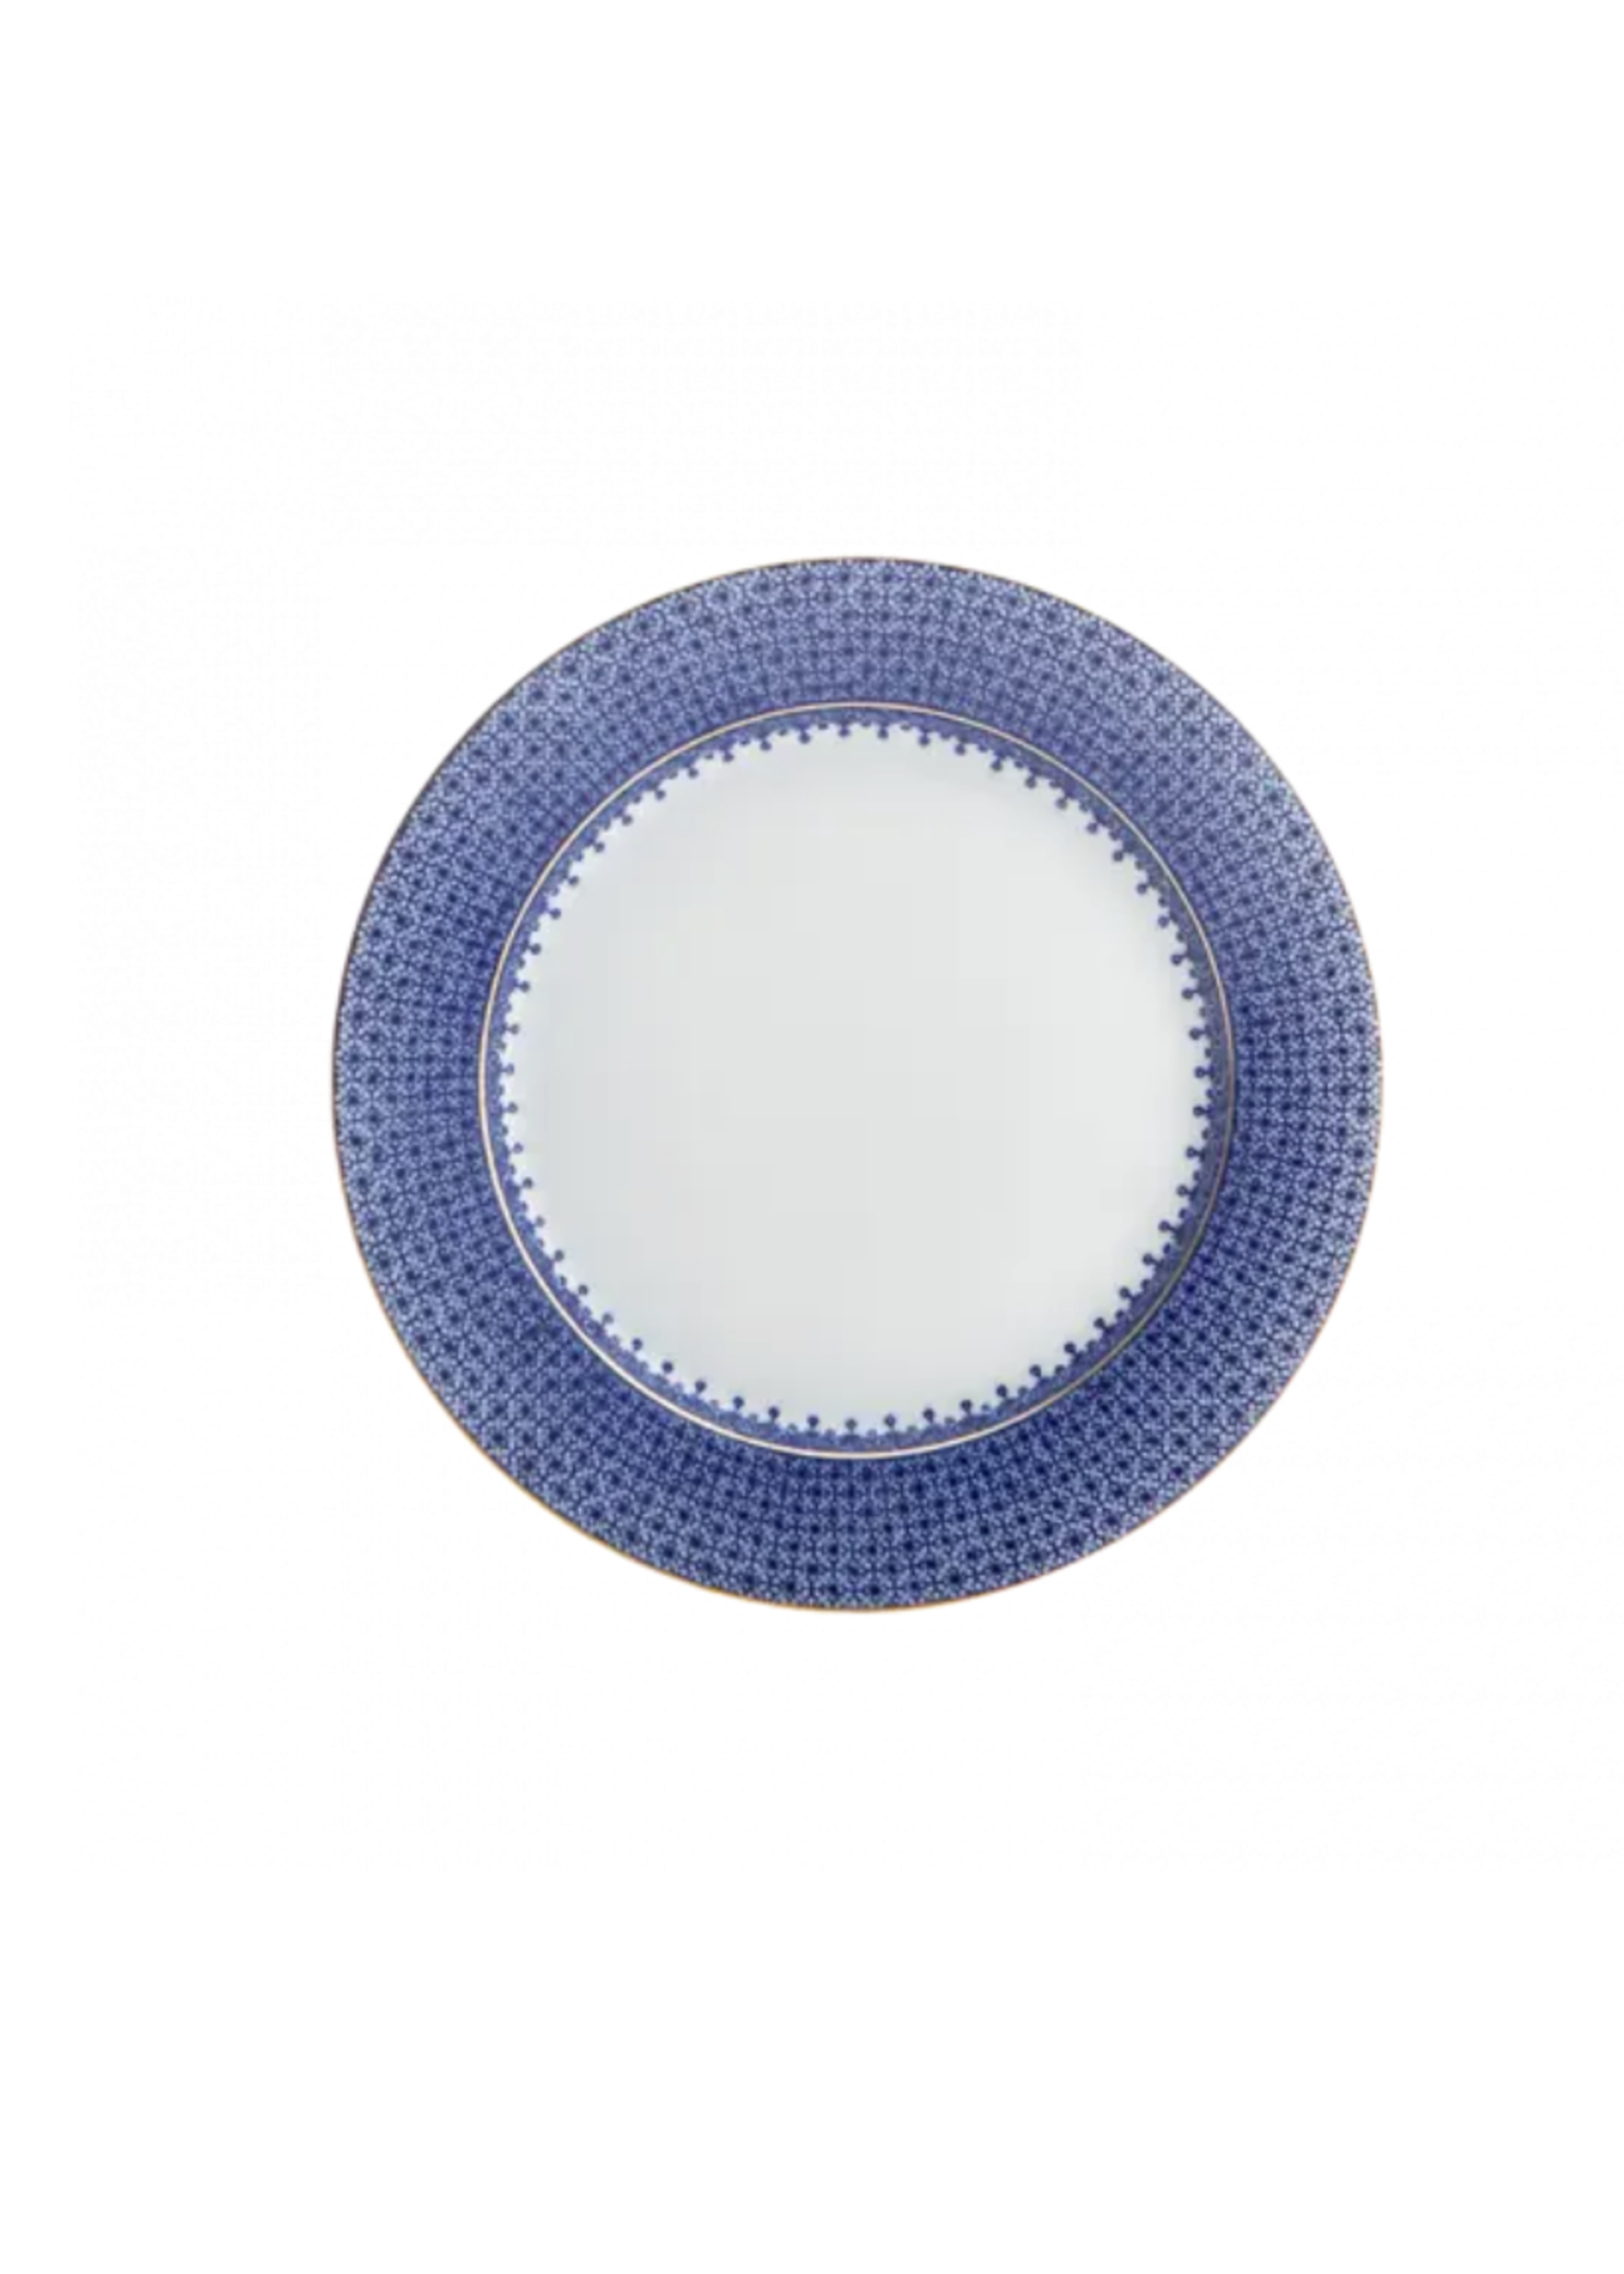 Mottahedeh Blue Lace Bread and Butter Plate